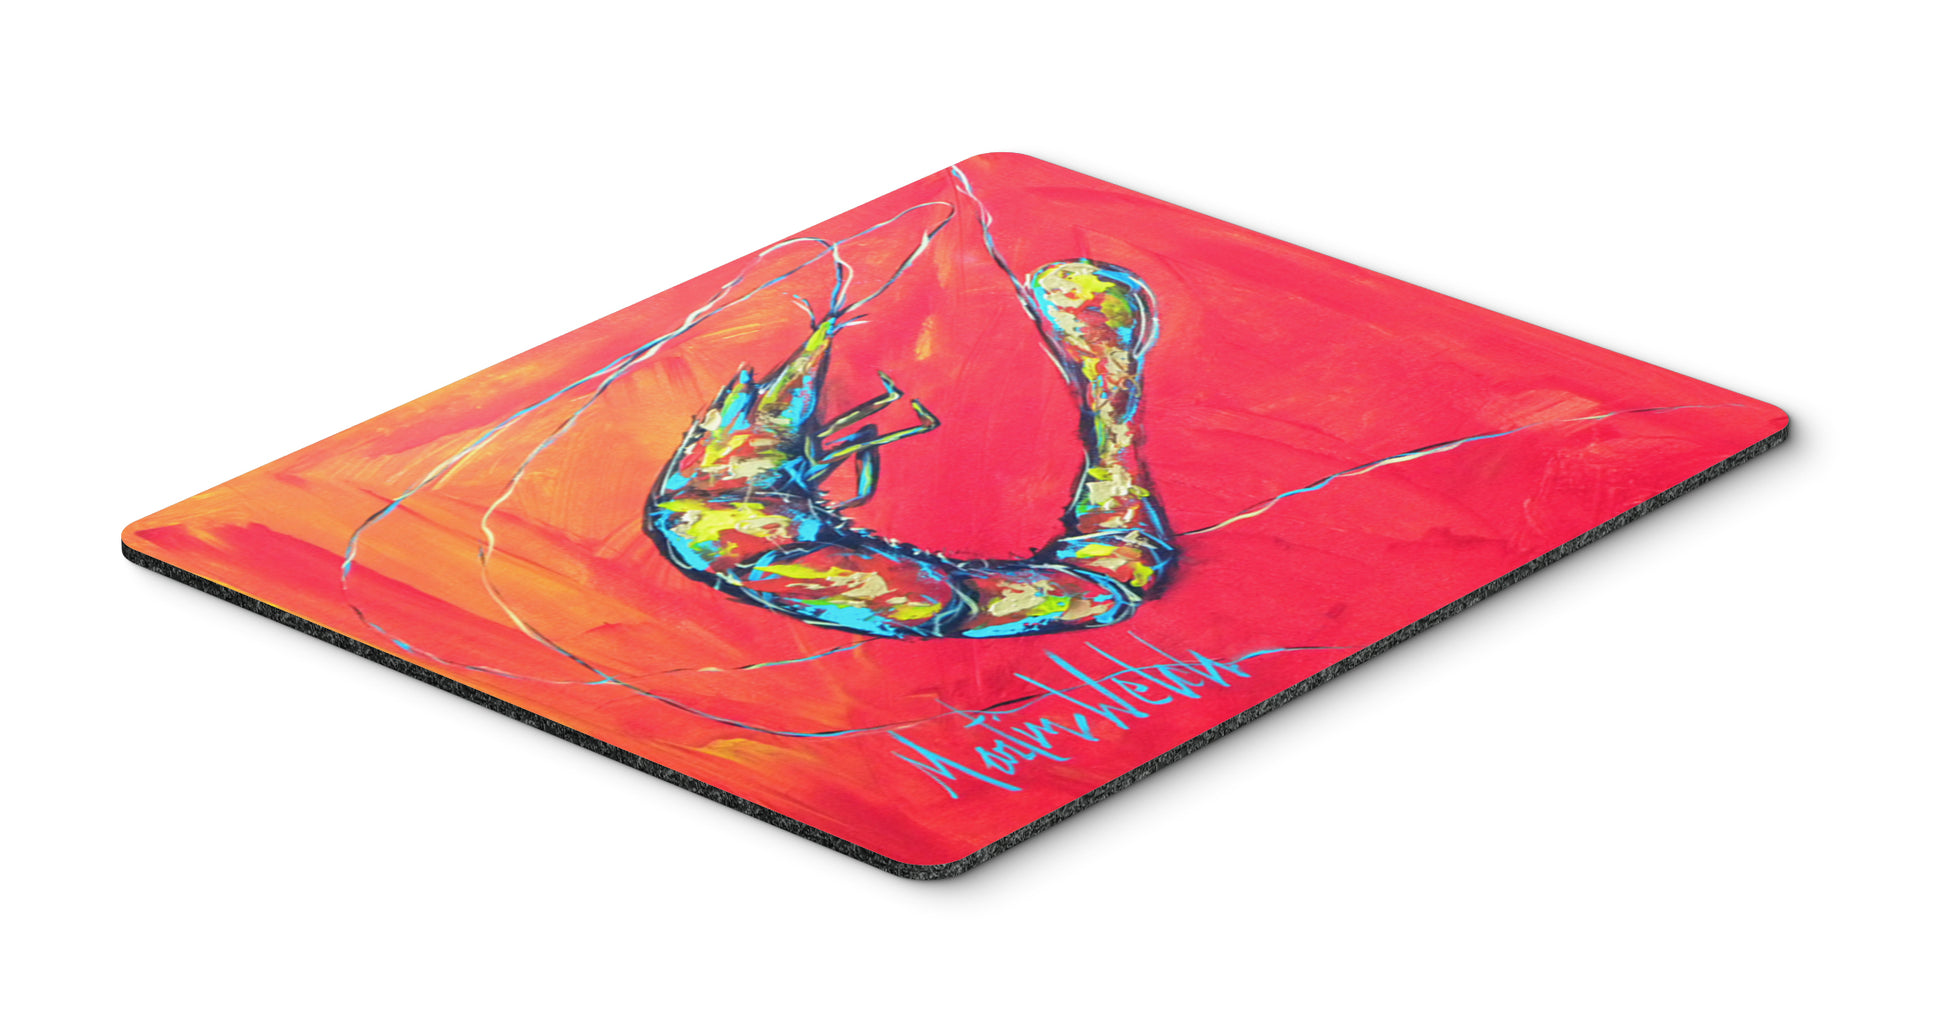 Buy this Shrimp Seafood Three Mouse Pad, Hot Pad or Trivet